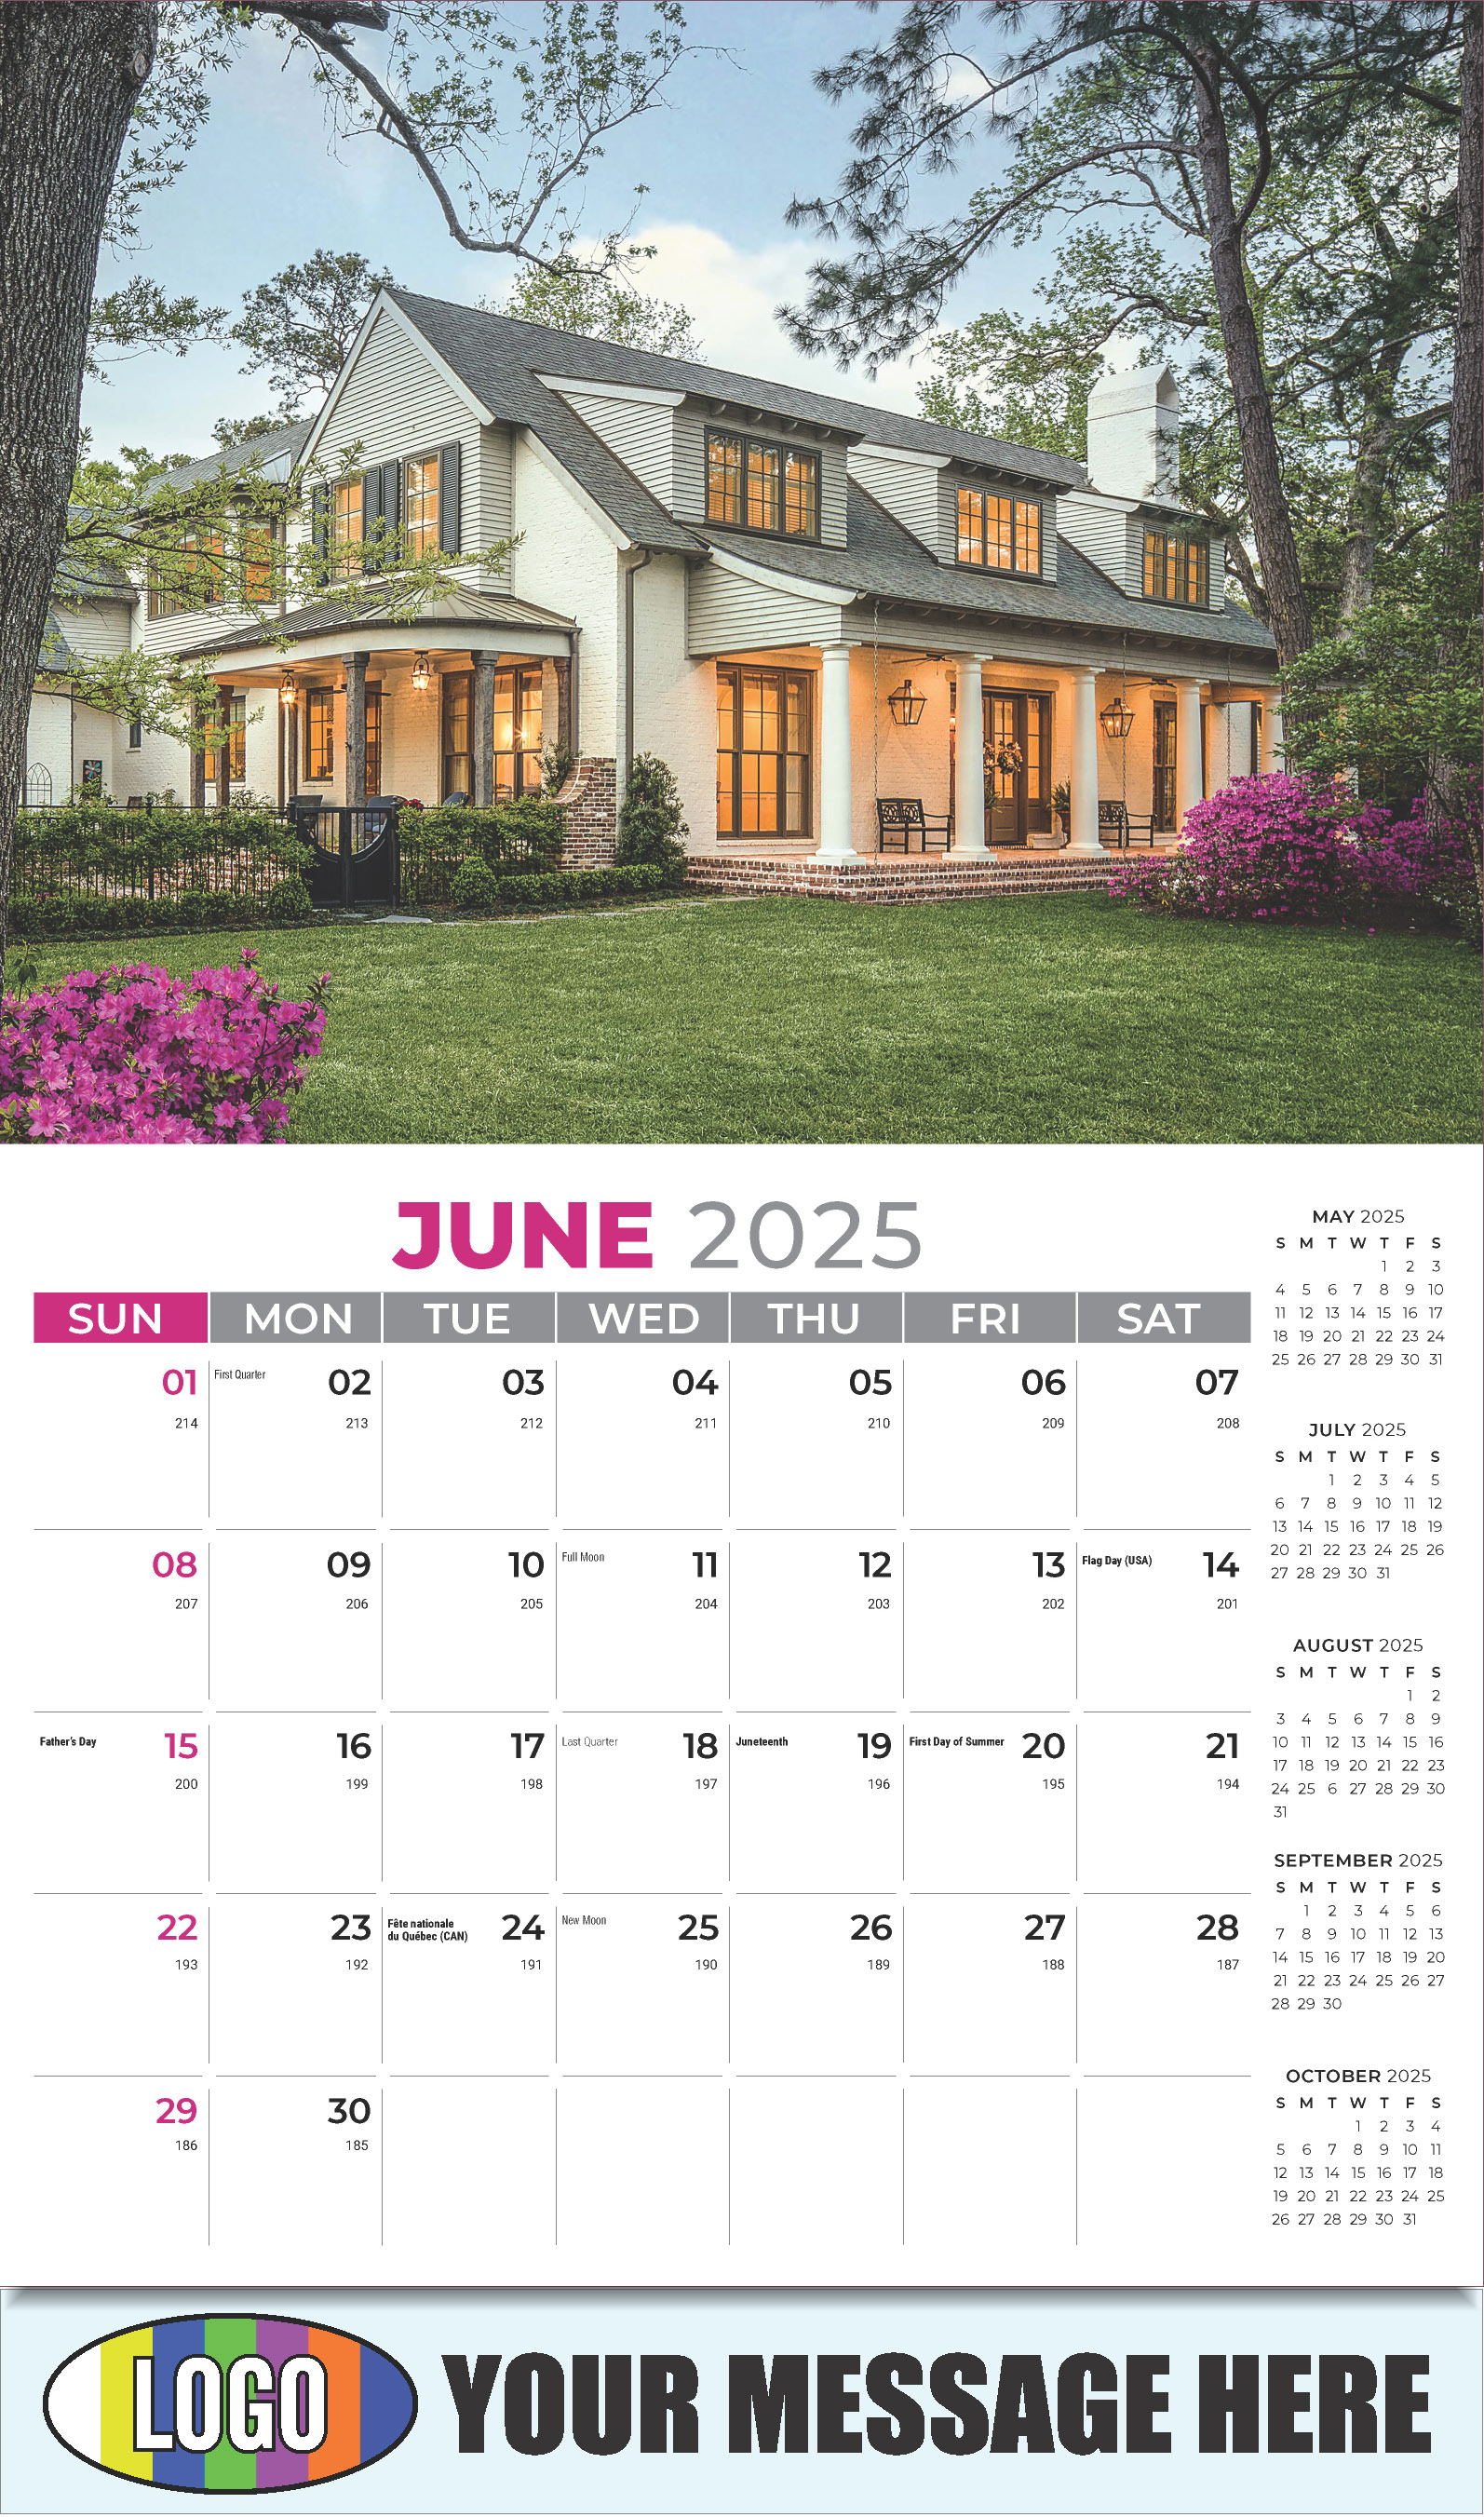 Luxury Homes 2025 Real Estate Agent Promotional Wall Calendar - June